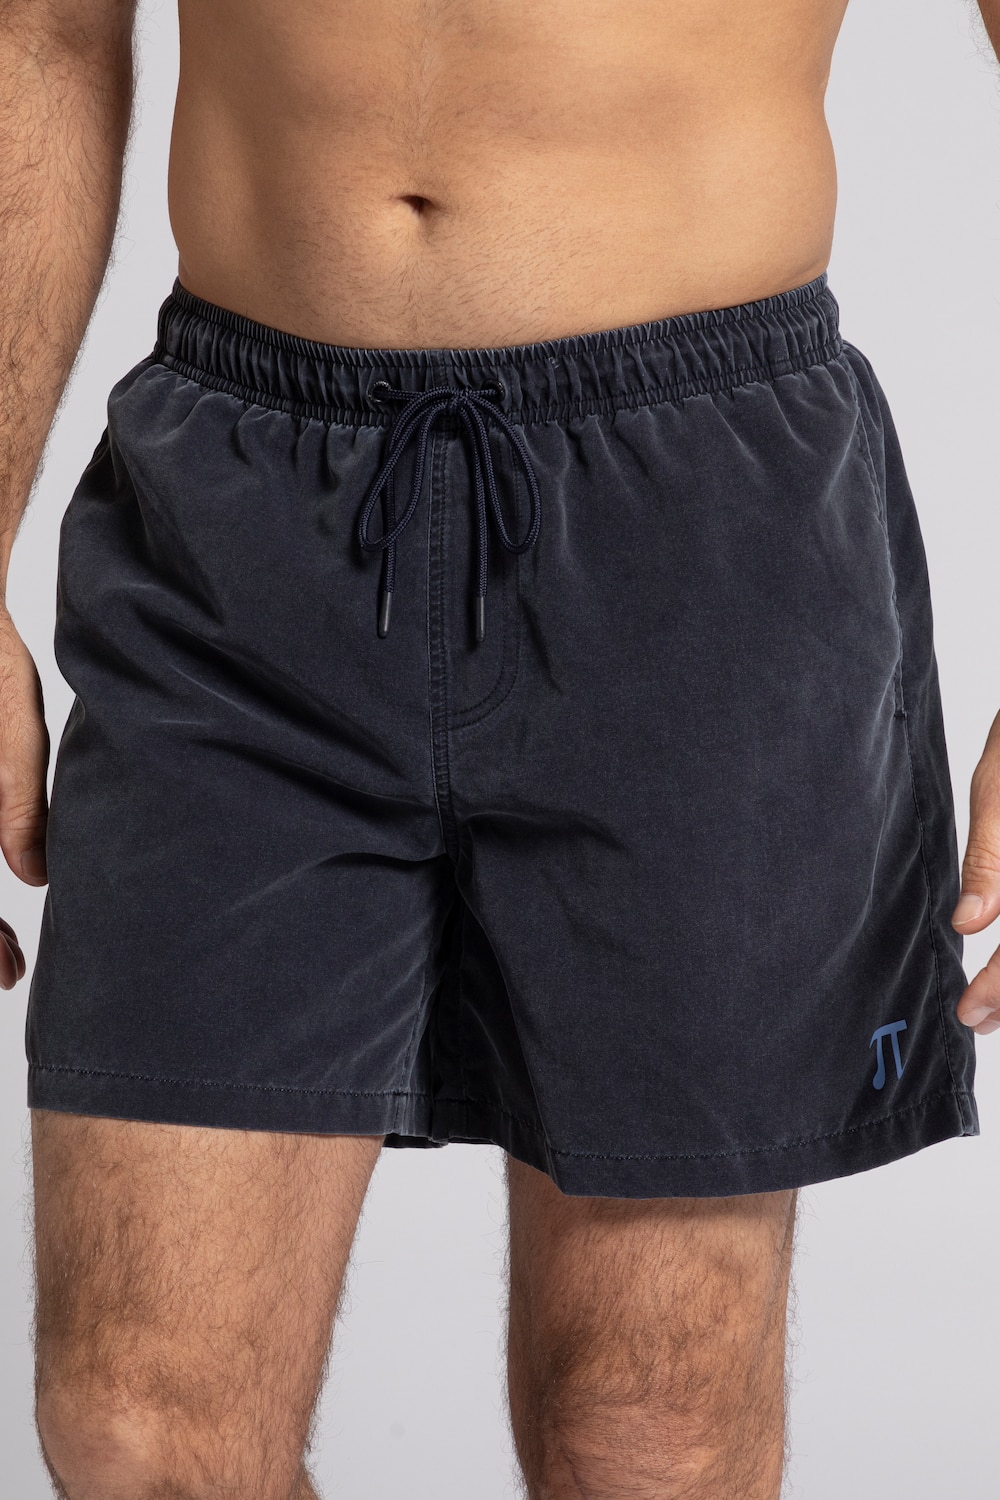 Grote Maten JAY-PI zwemshortsmale, blauw, Maat: L, Polyester, JAY-PI